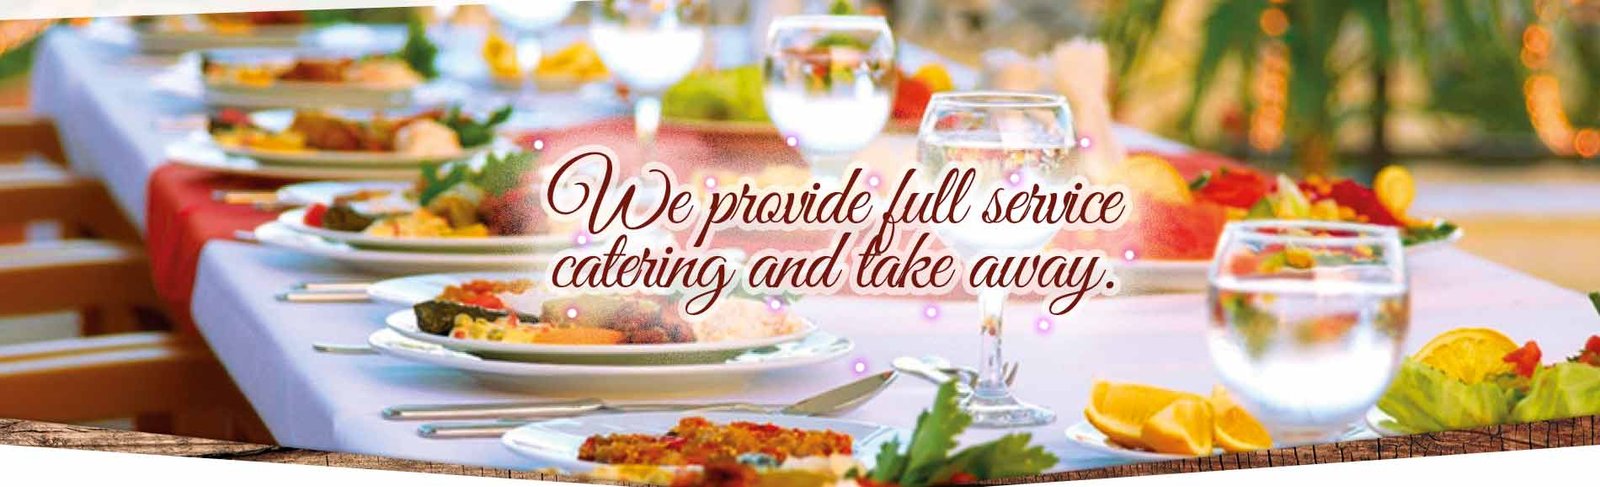 Business Catering services in Gage County